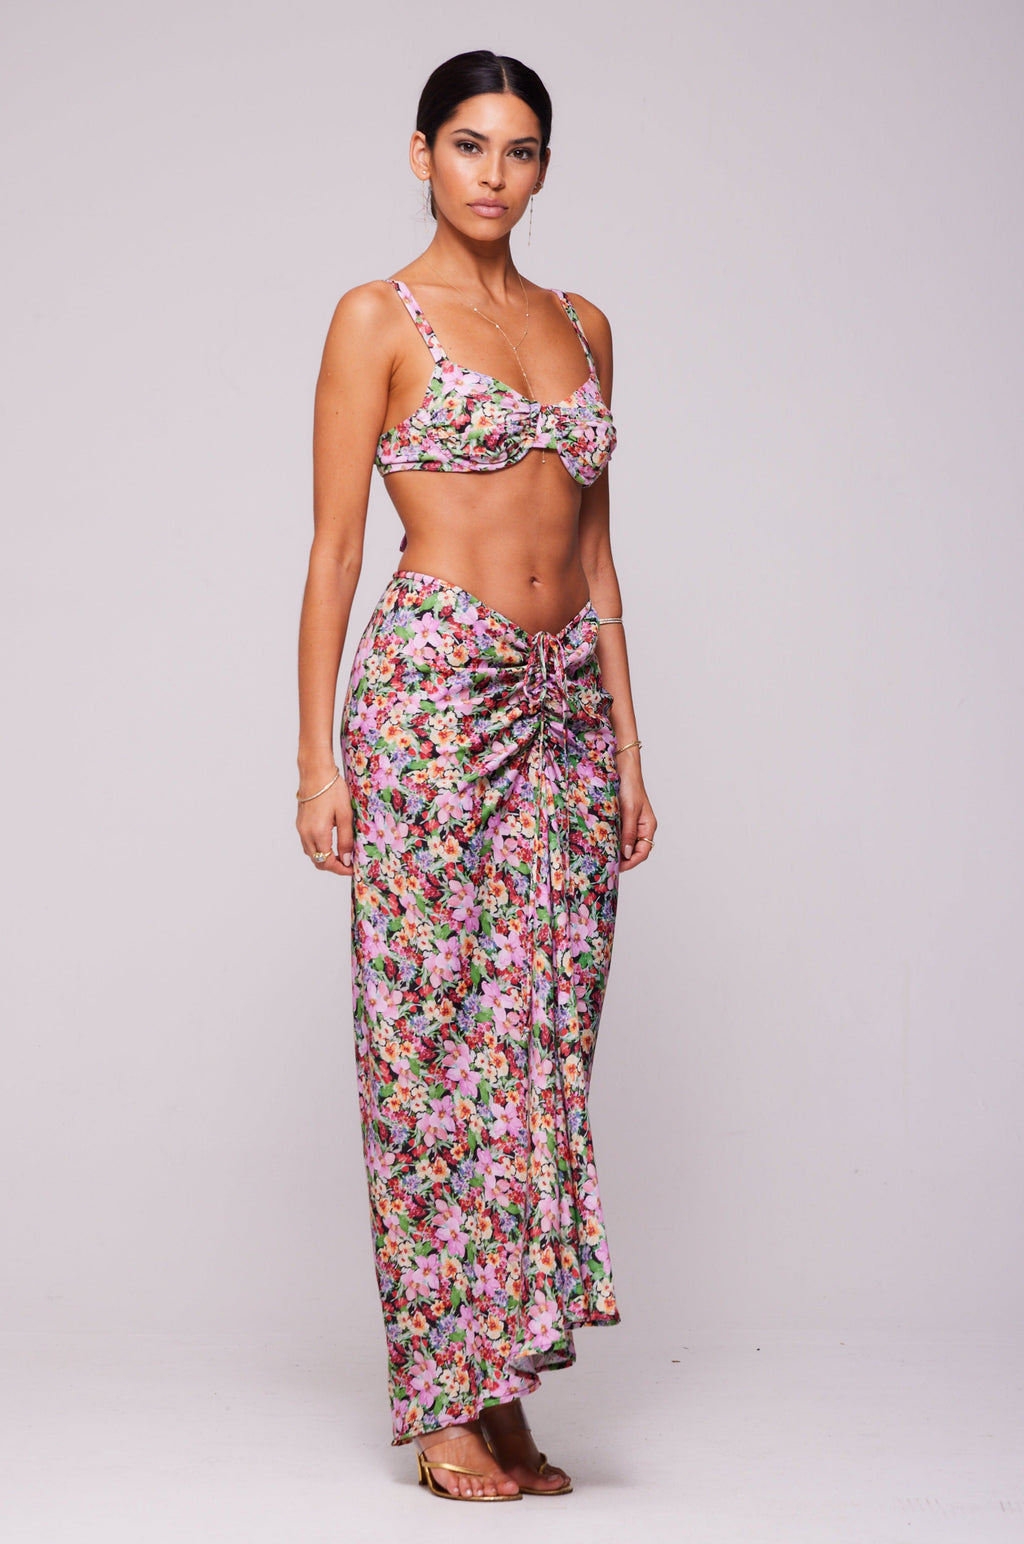 This is an image of Pepper Bra Top in Bloom - RESA featuring a model wearing the dress